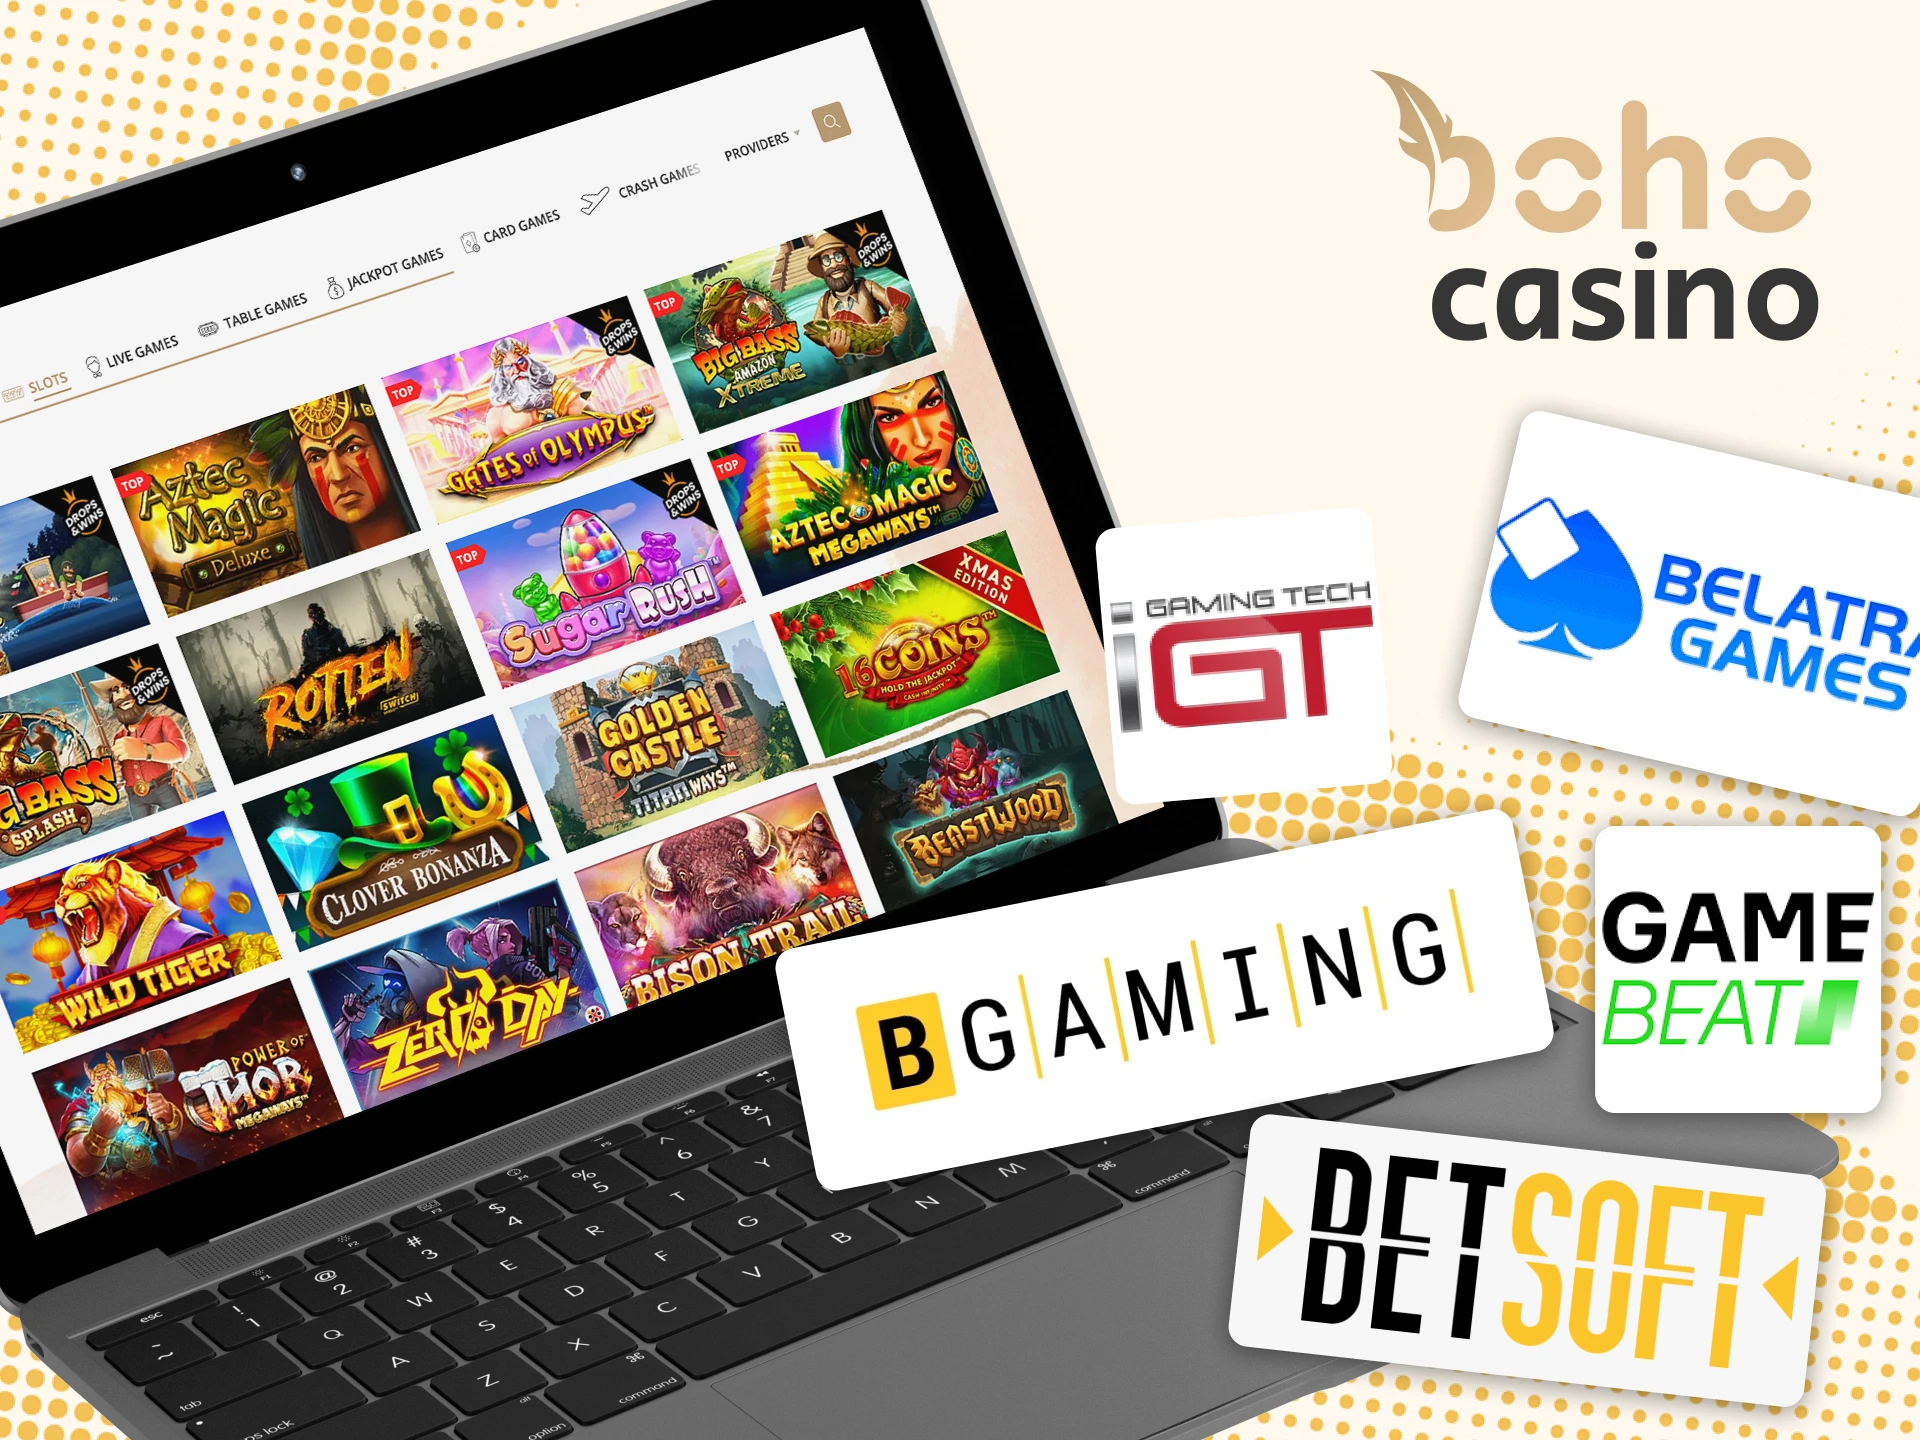 Boho Casino cooperates with famous slot providers.